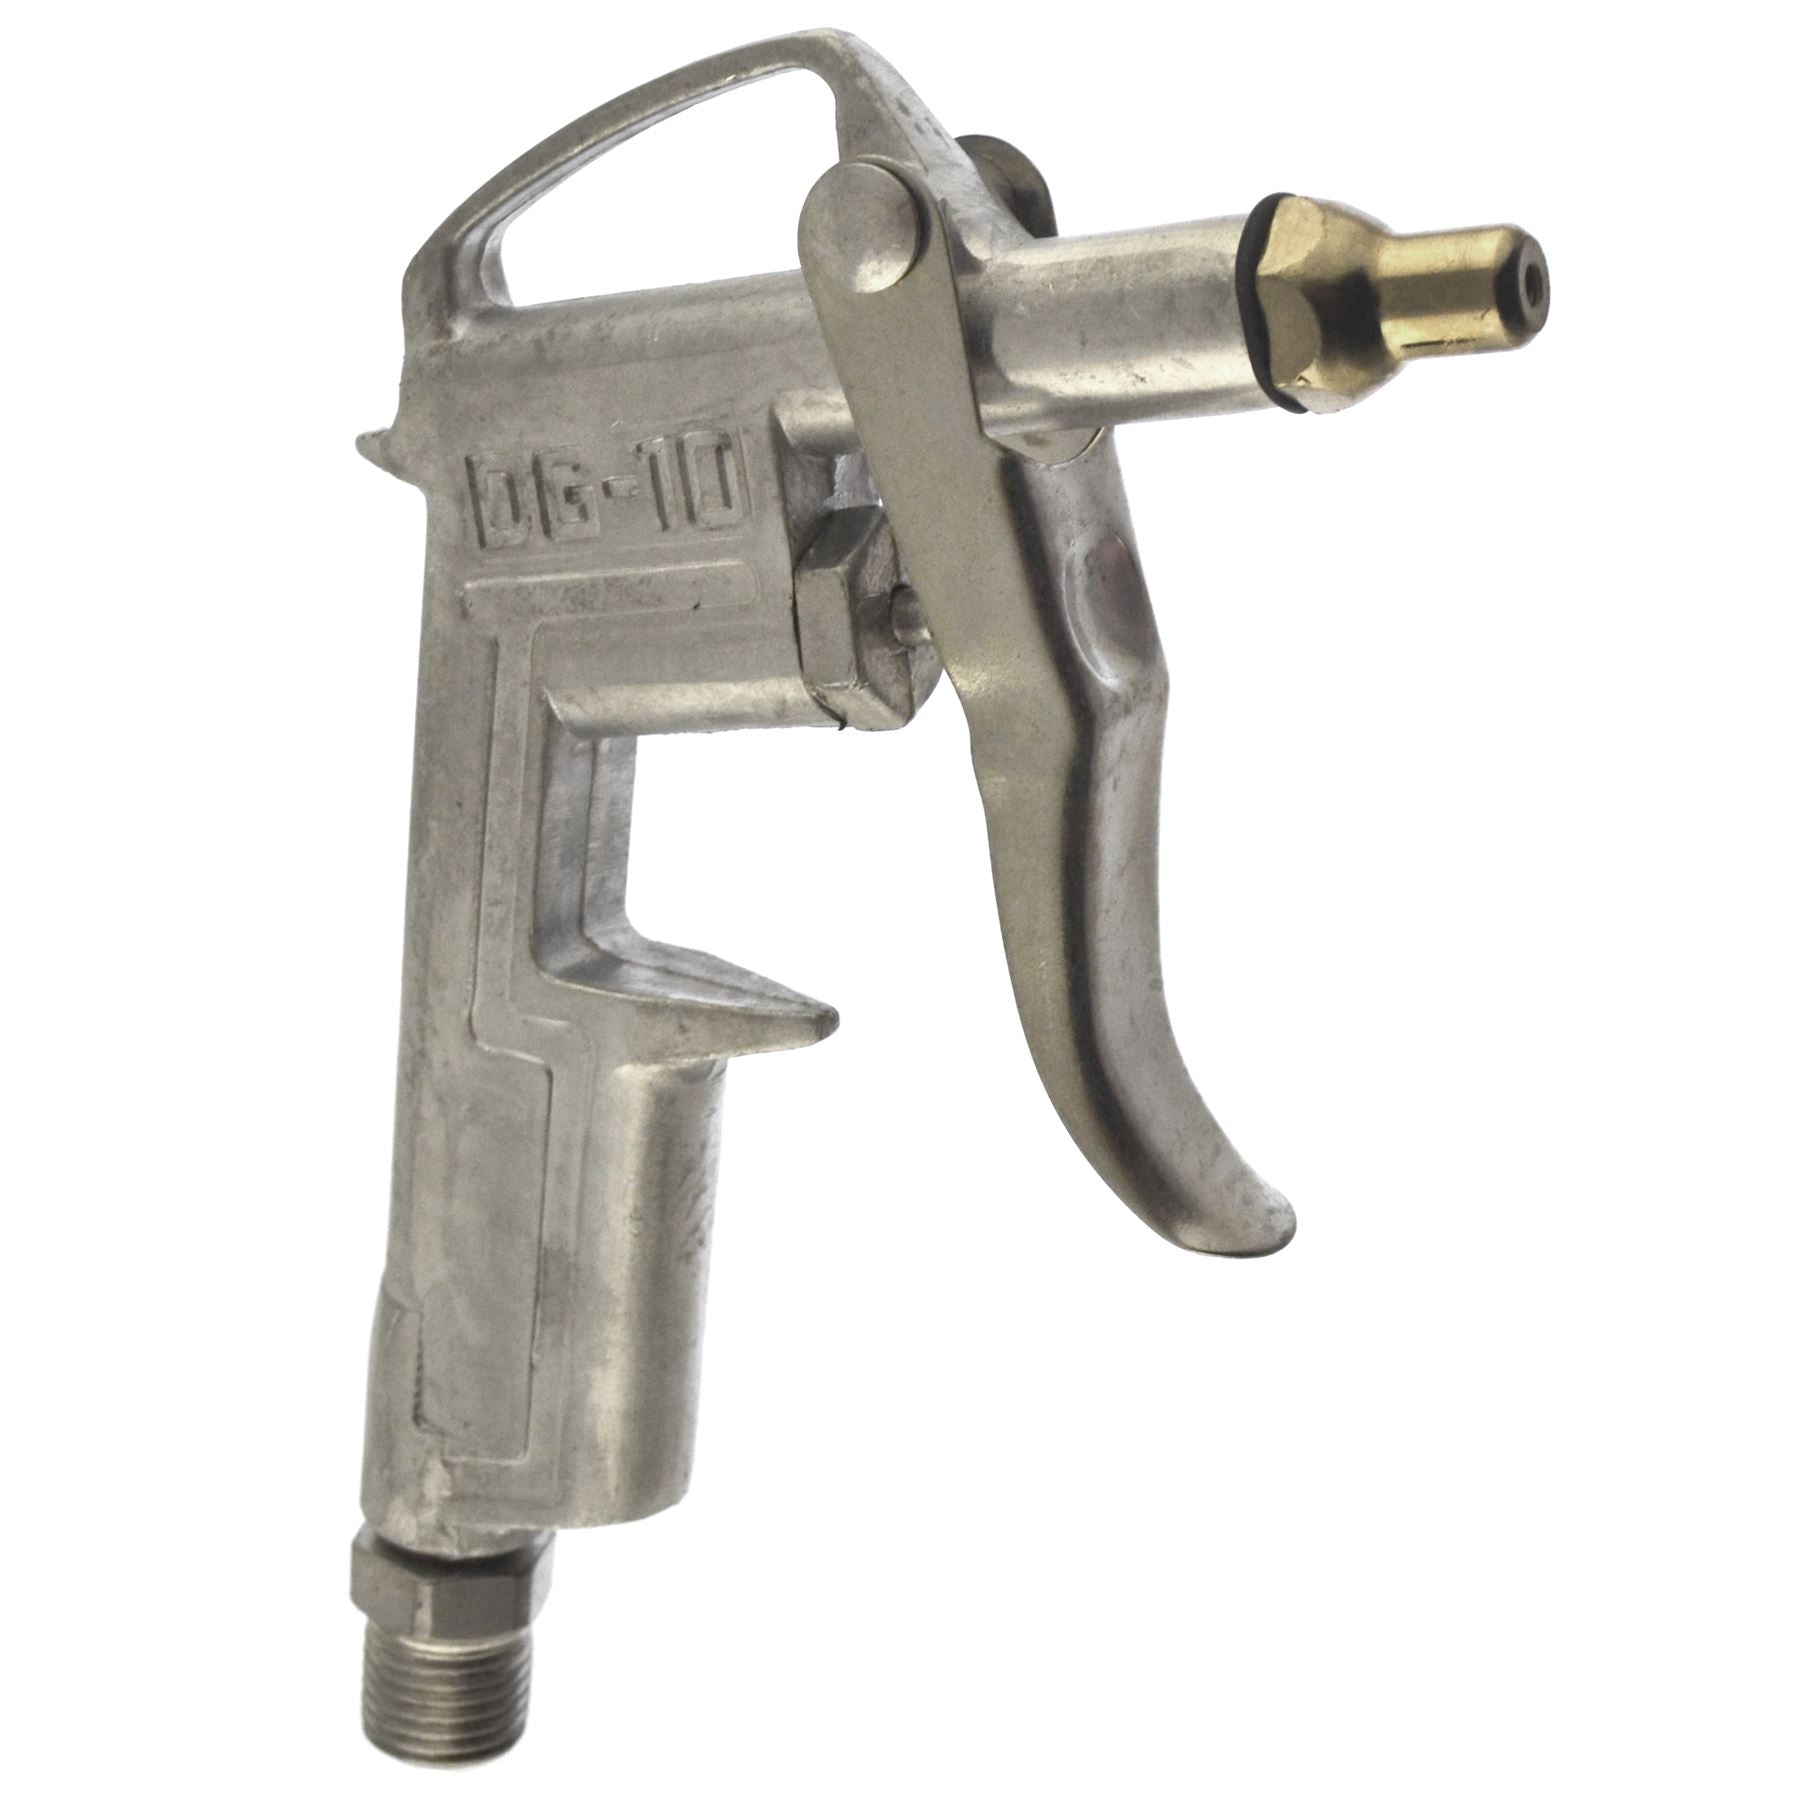 Air Blow / Dust / Blower Gun with Short Nozzle (5mm & 75mm) by BERGEN AT488